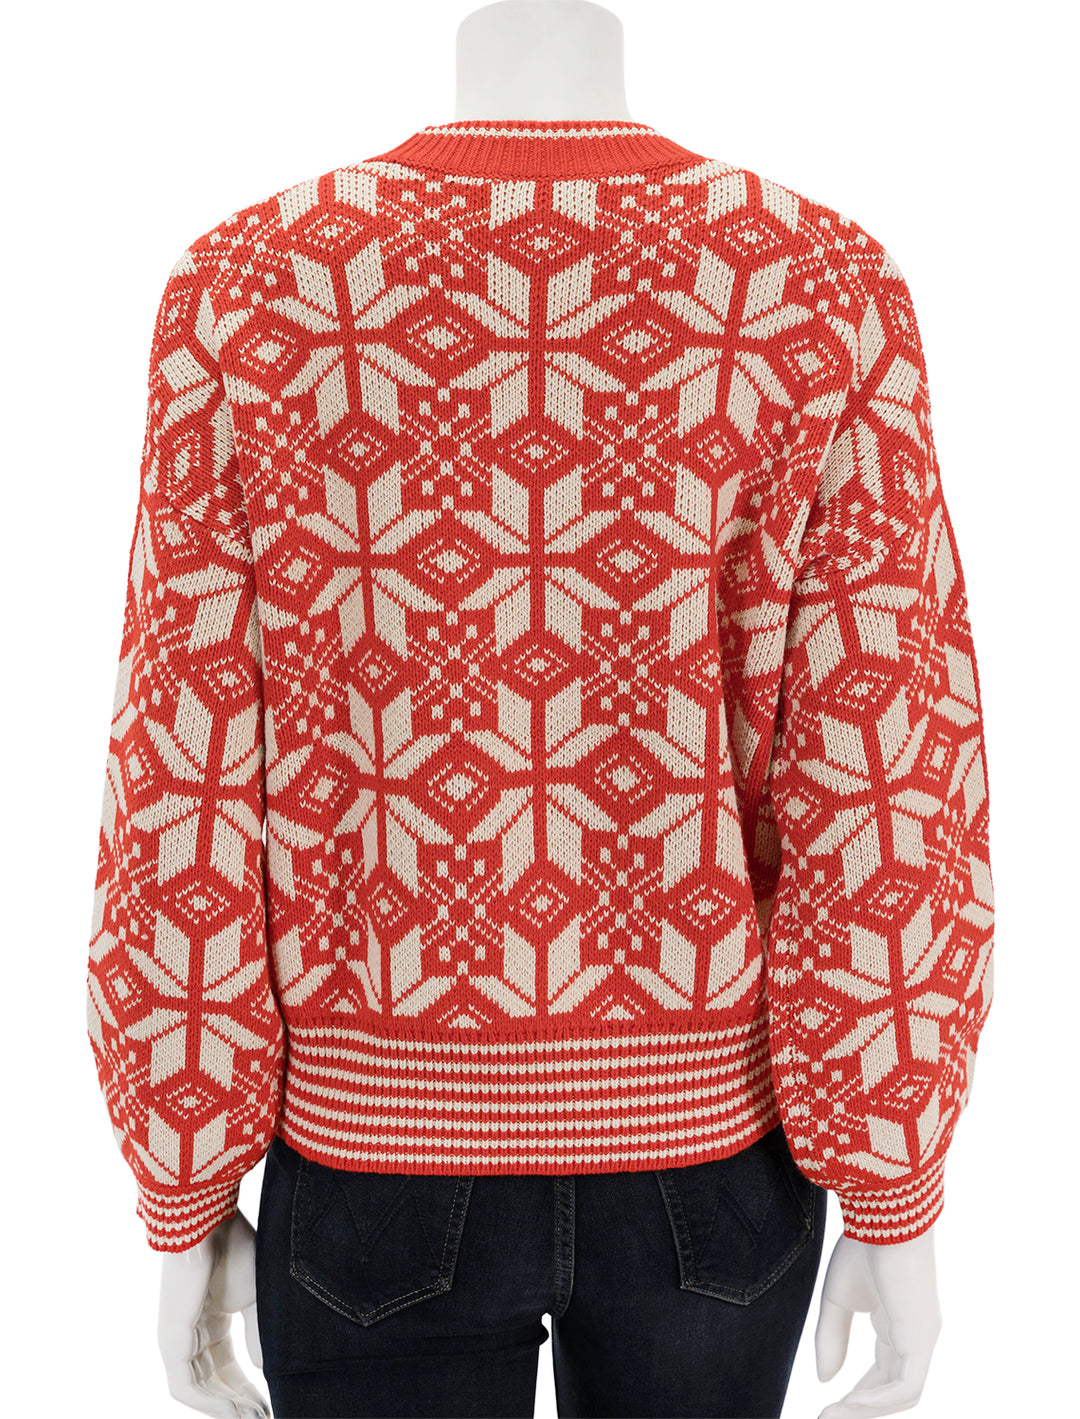 Back view of The Great's the snowflake pullover in alpine spice.